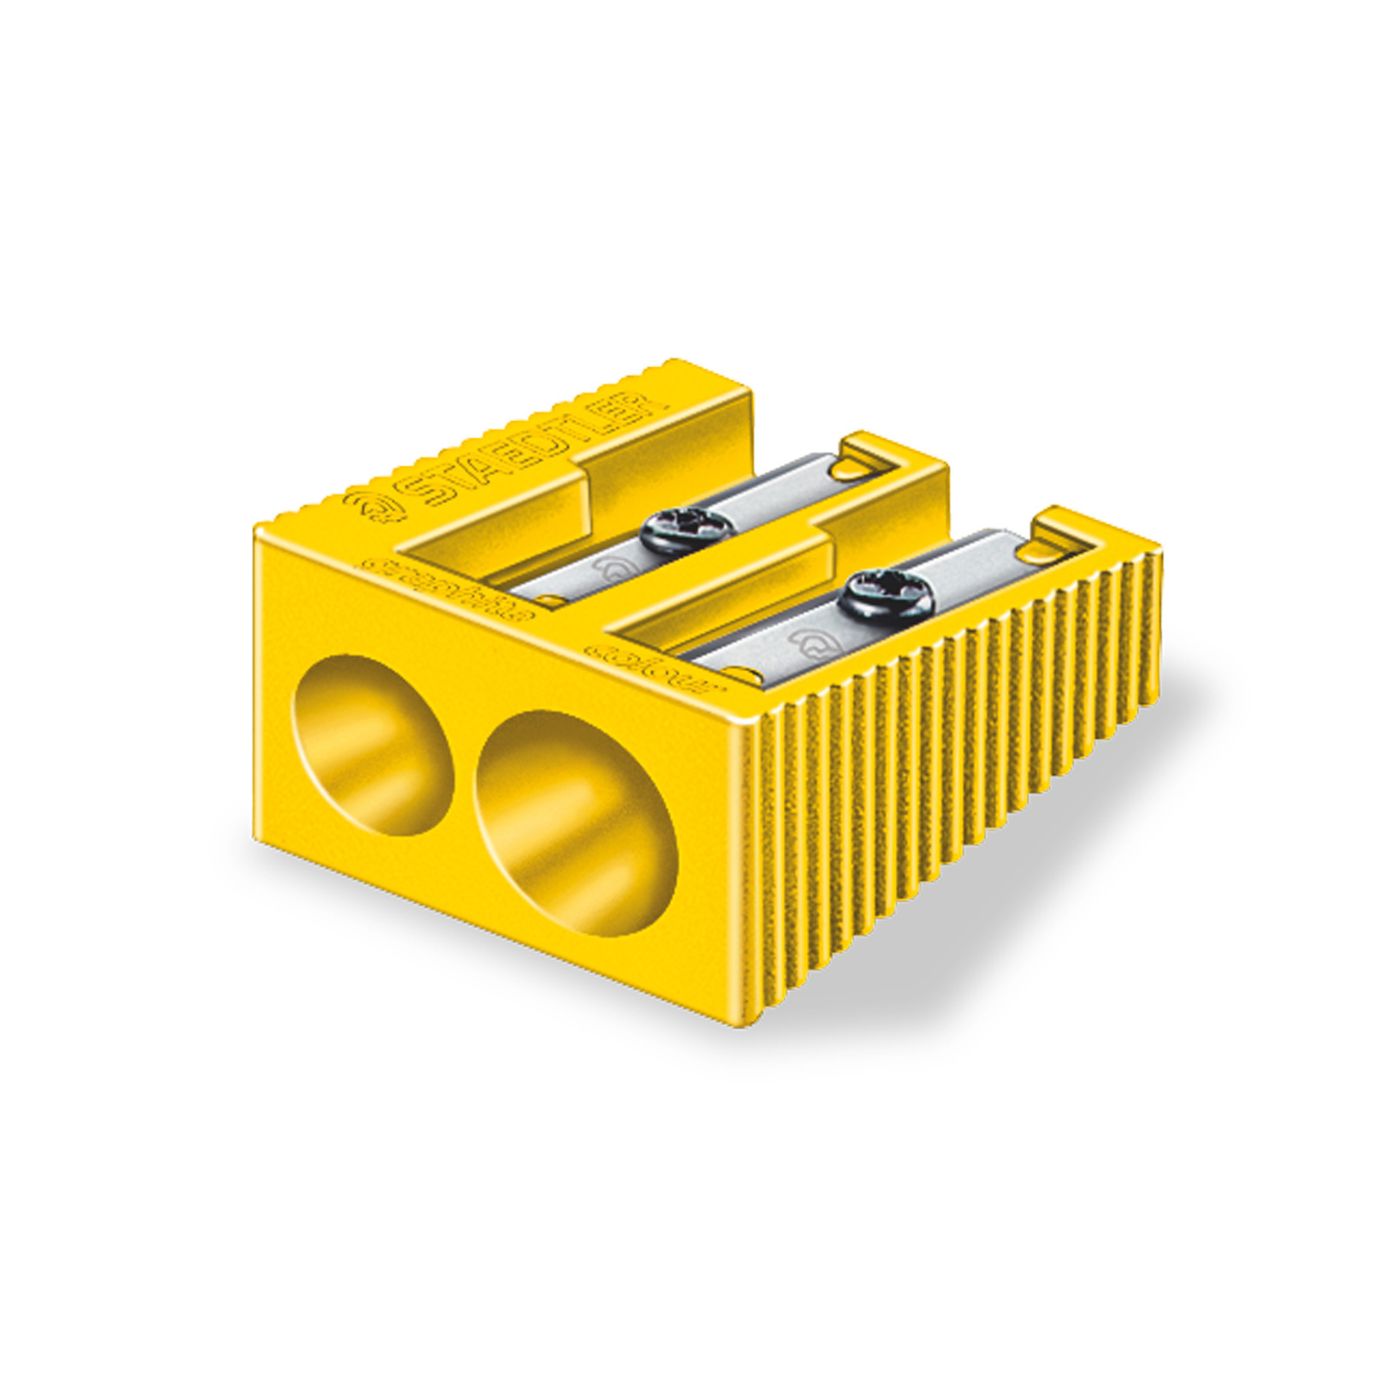 Staedtler Double Hole Pencil Sharpener 510 60 Plastic Yellow